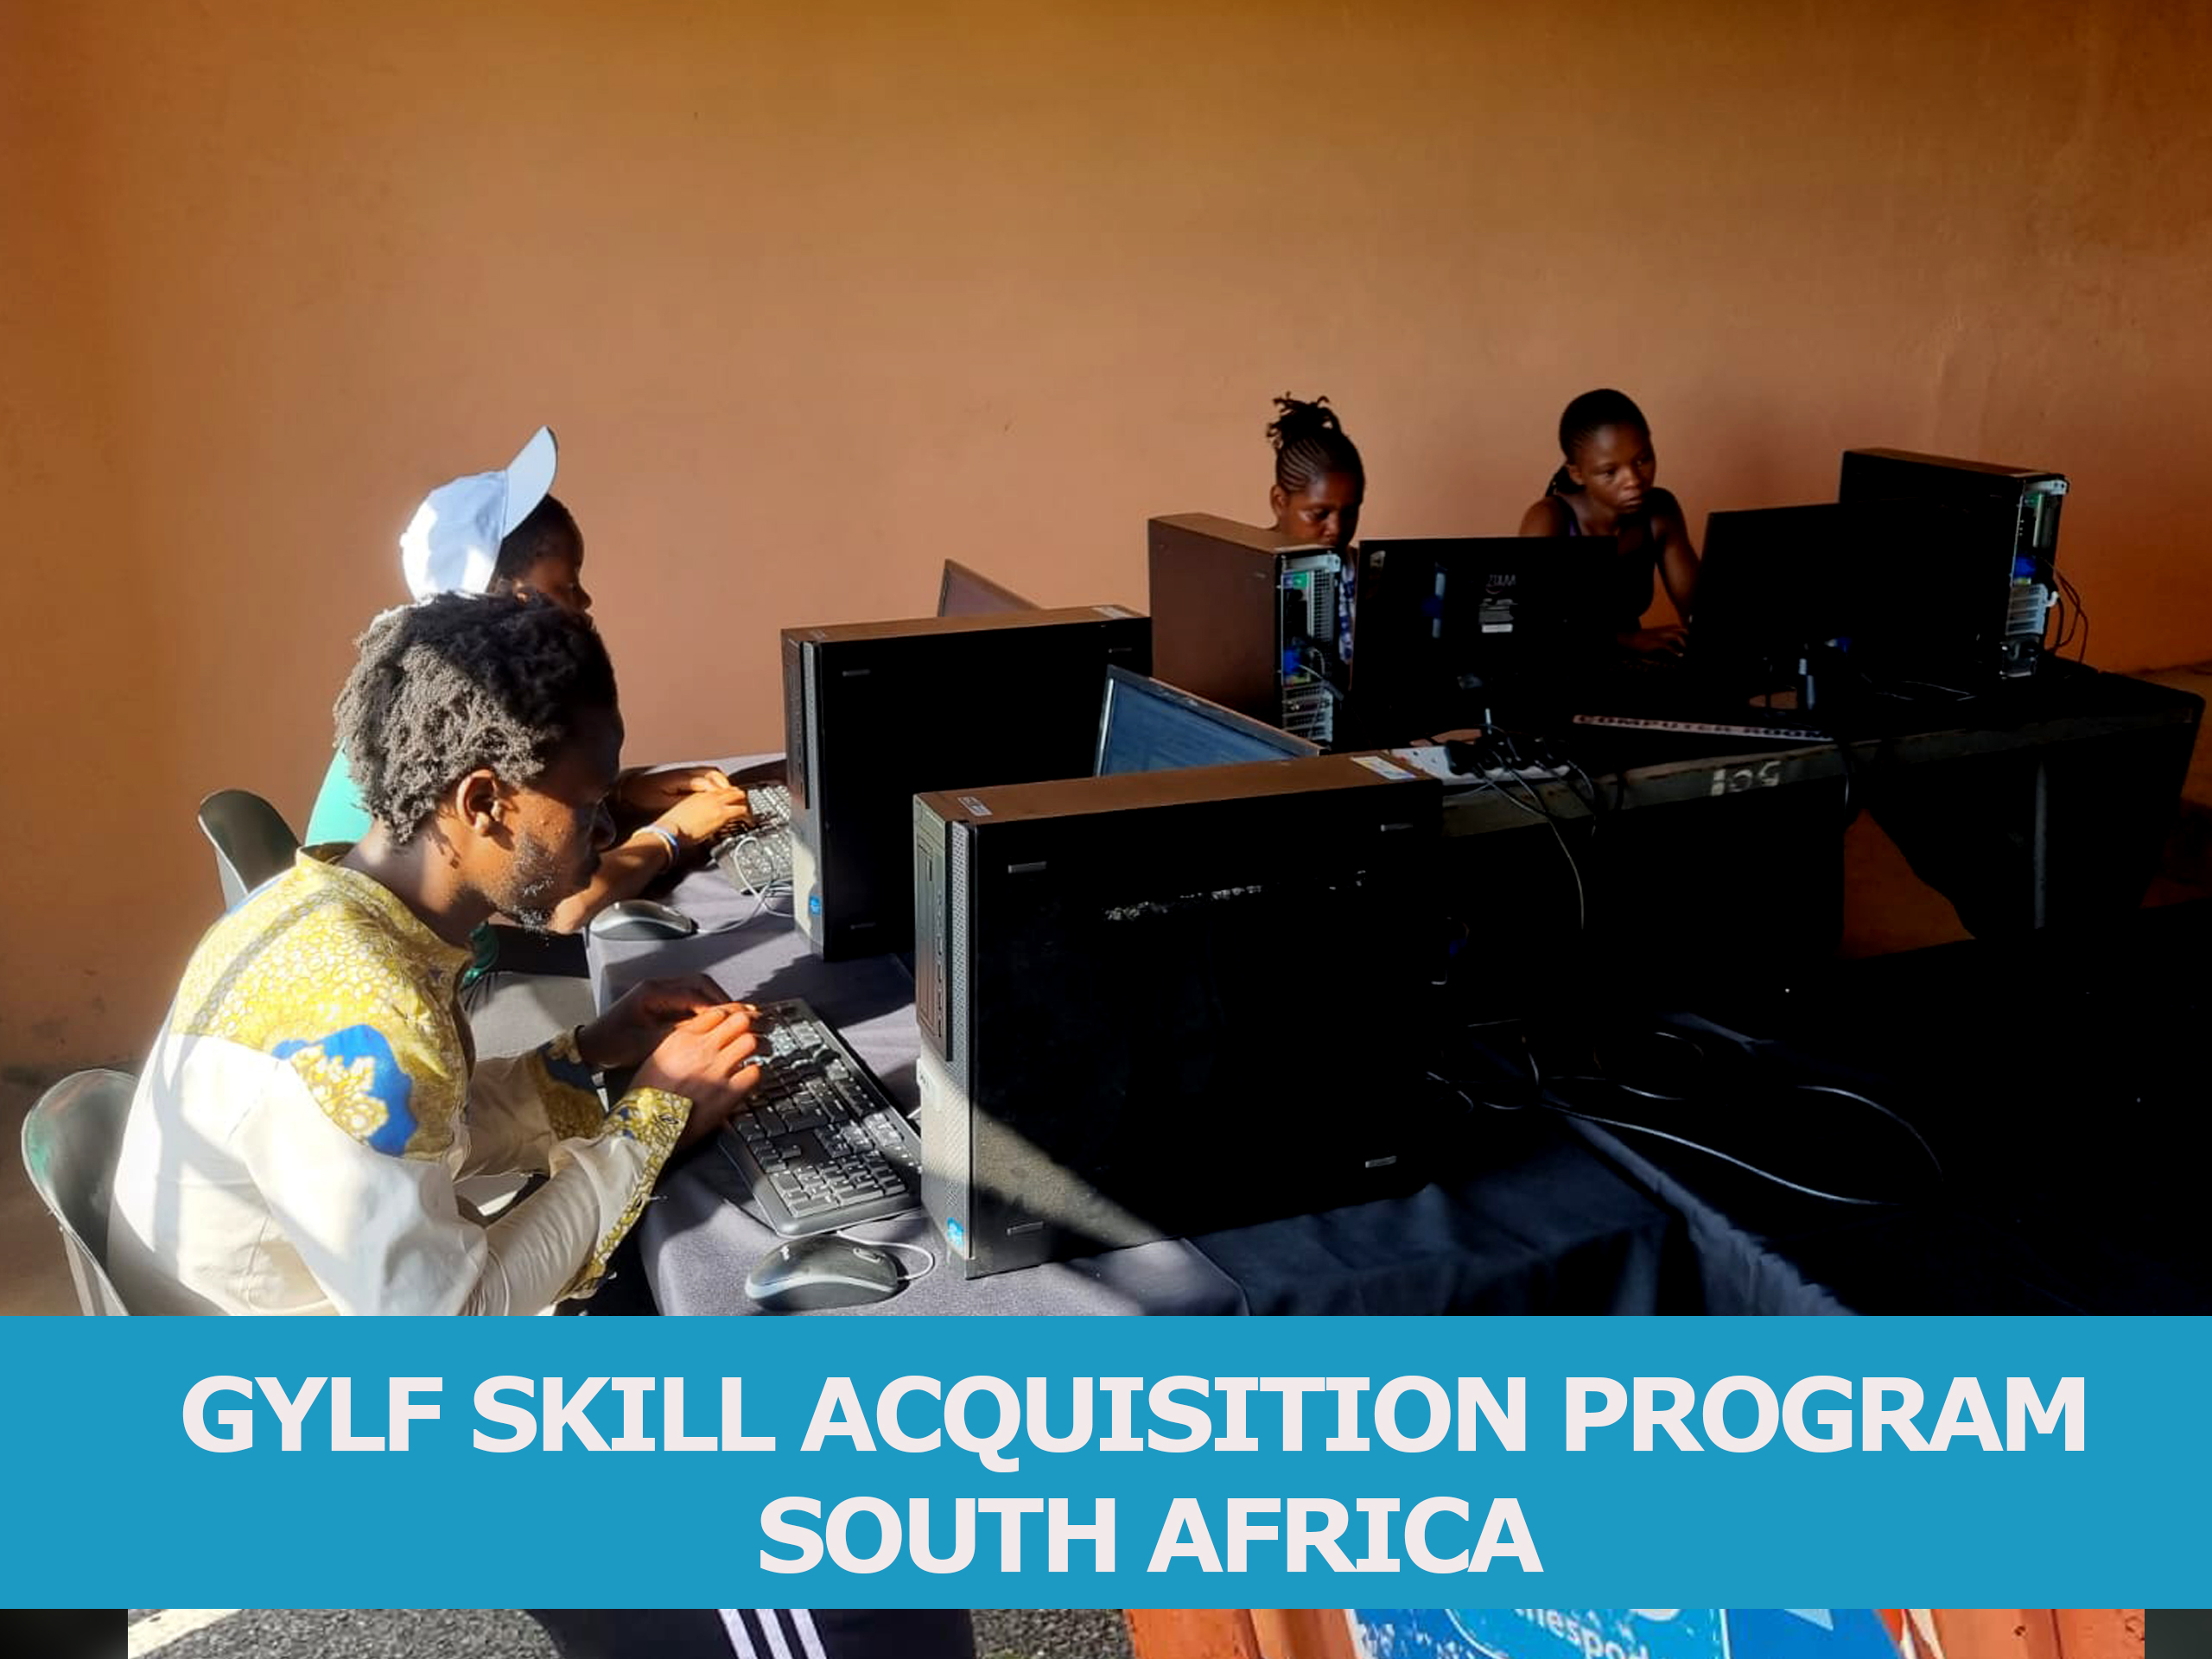 SKILL ACQUISITION PROGRAM IN SOUTH AFRICA